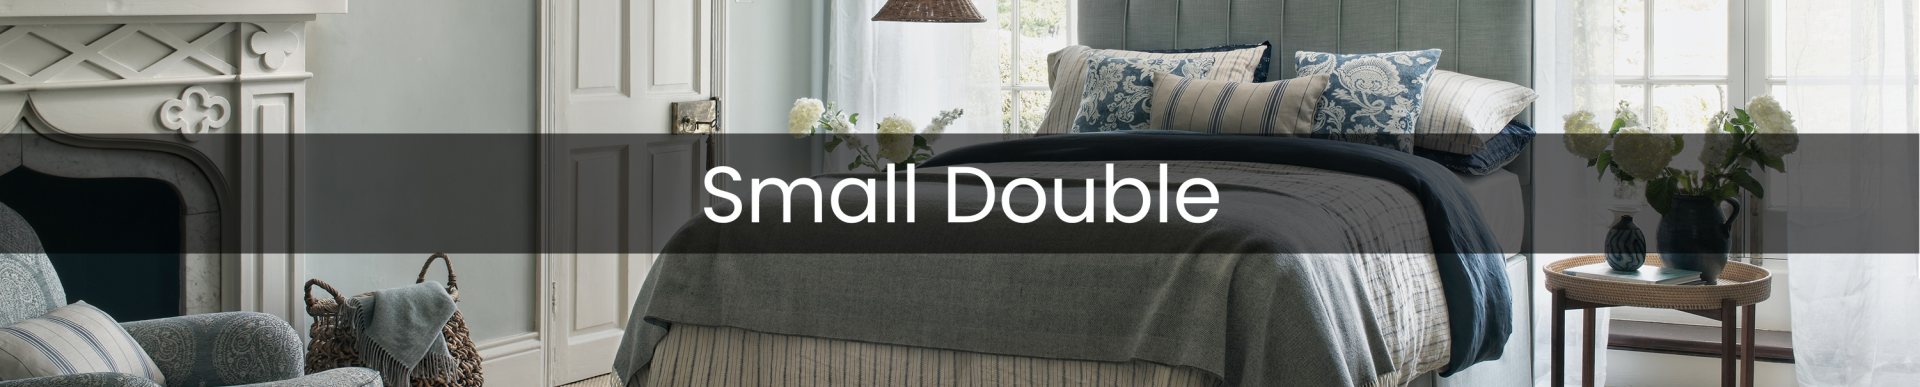 small double